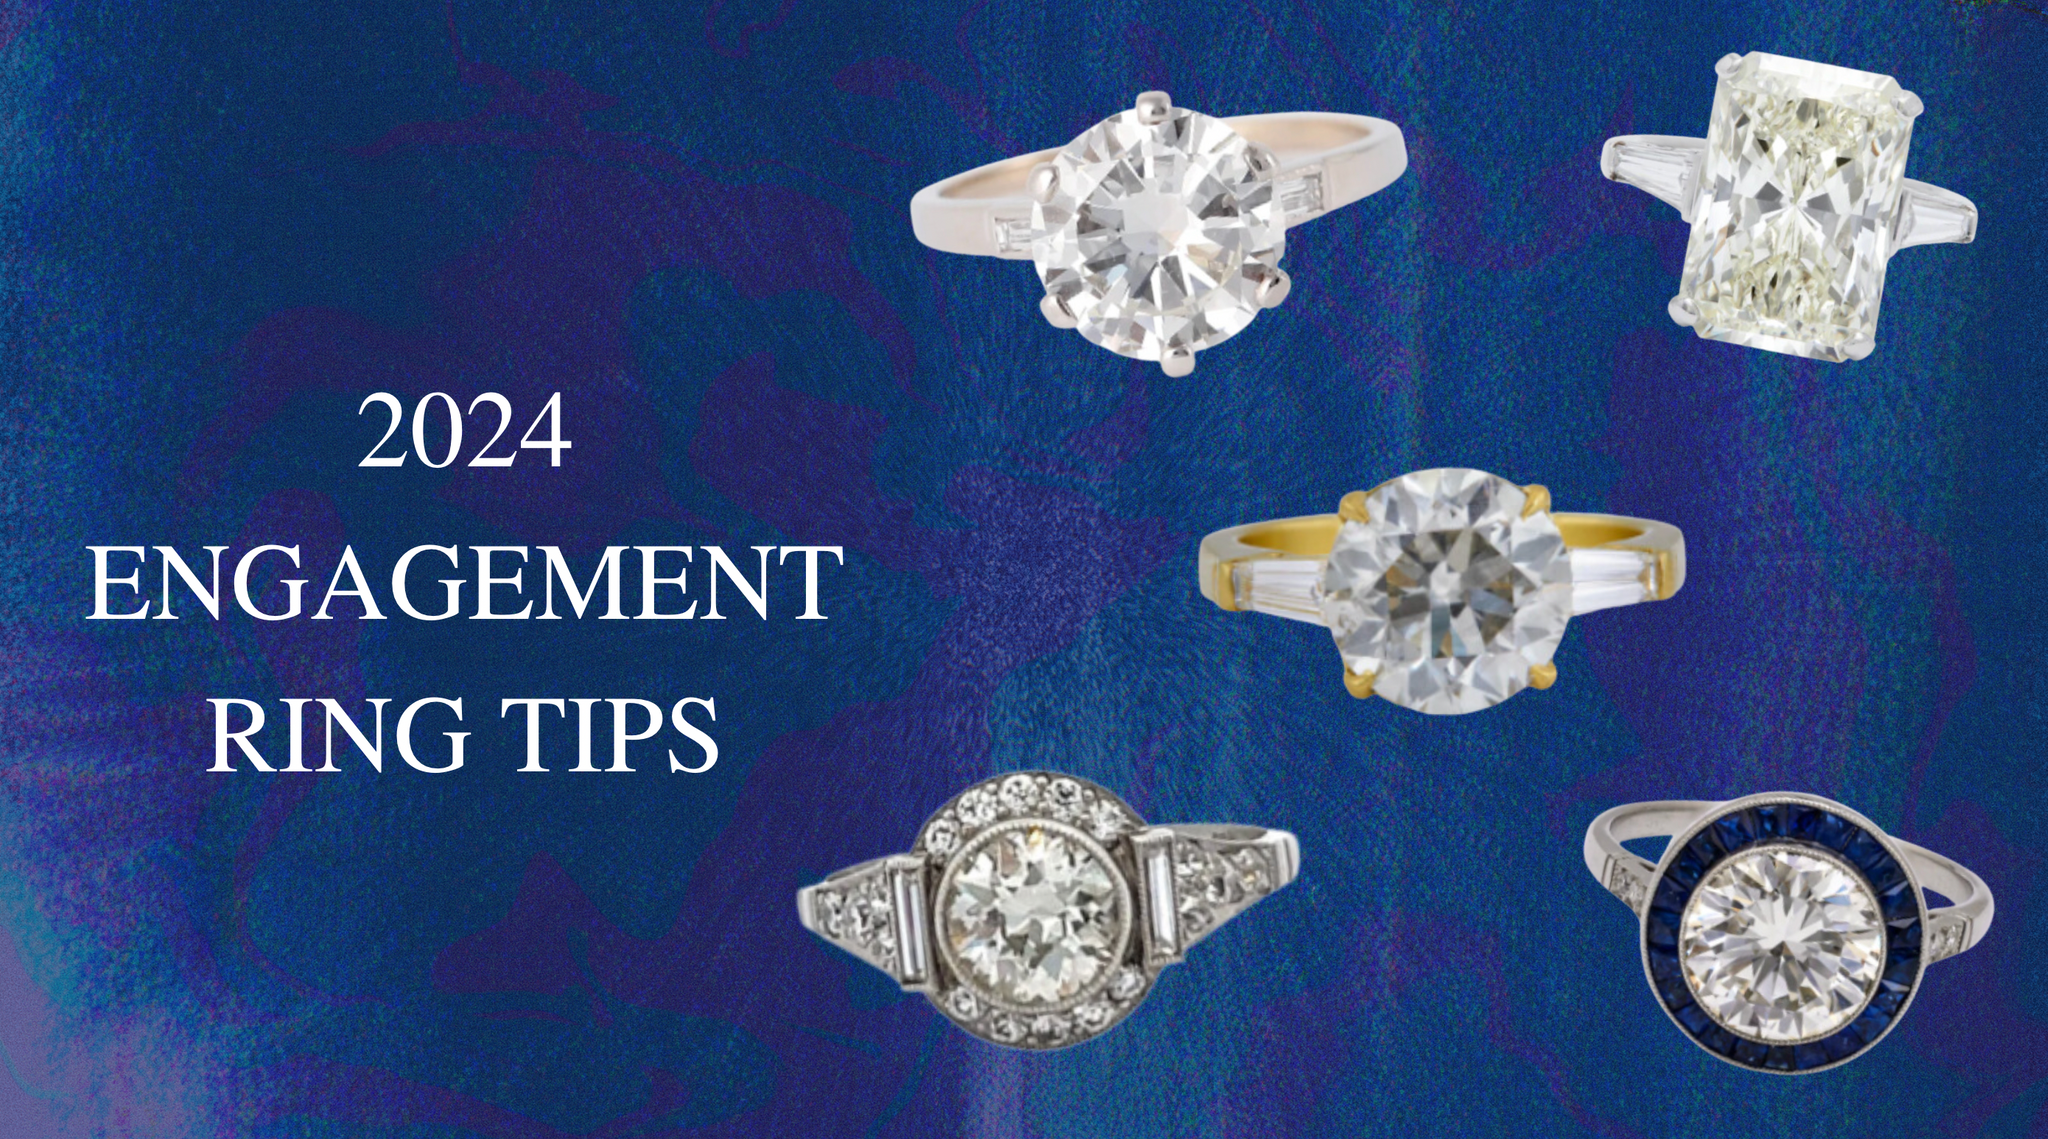 Planning a 2024 Engagement? Here are some tips